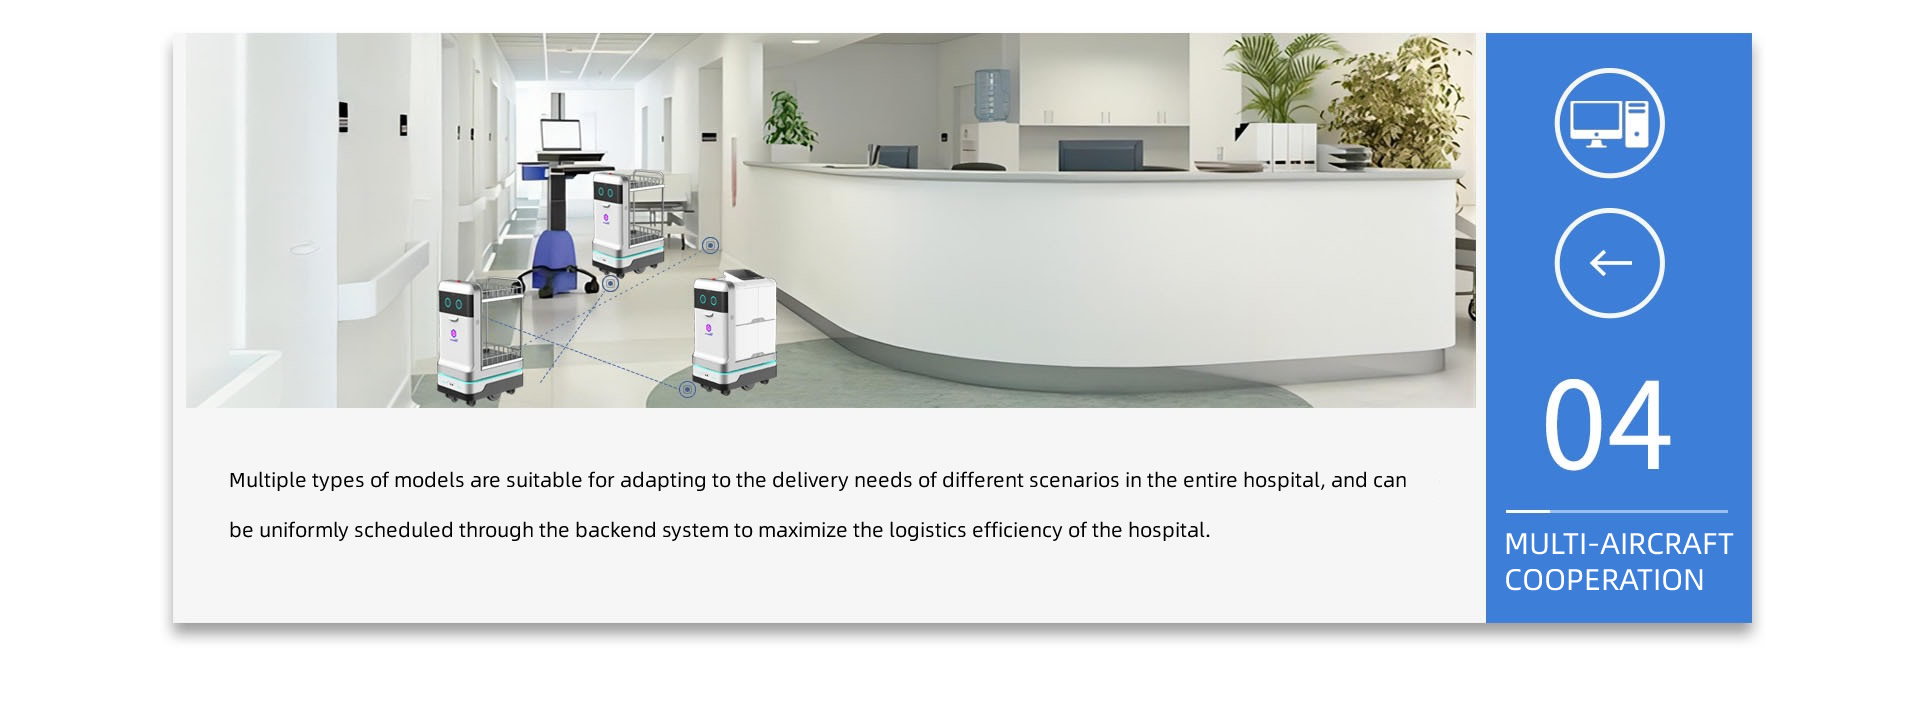 MULTI-AIRCRAFT COOPERATION: Multiple types of models are suitable for adapting to the delivery needs of different scenarios in the entire hospital, and can be uniformly scheduled through the backend system to maximize the logistics efficiency of the hospital.